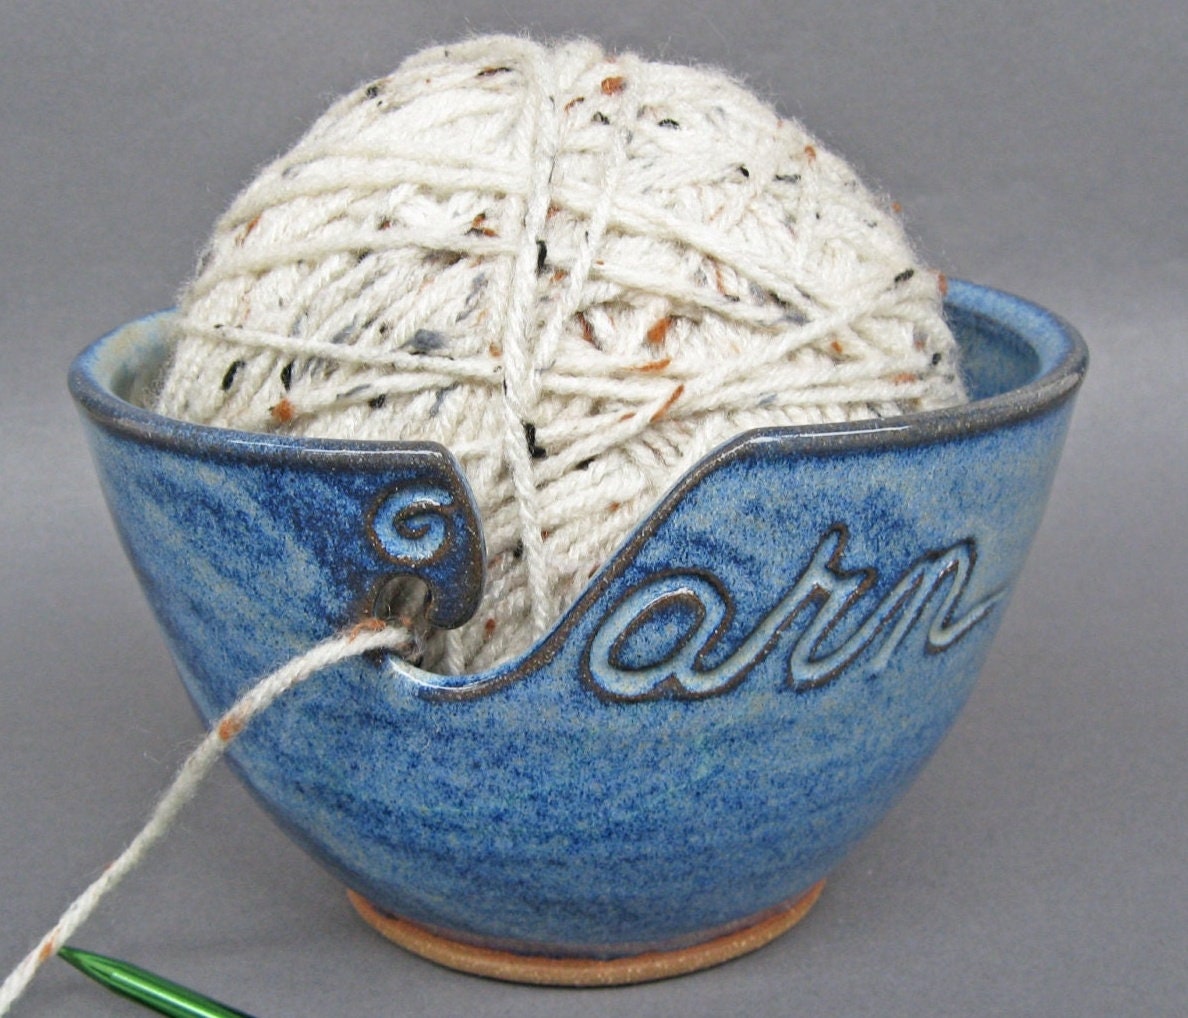 Large Yarn Bowl for Crochet and Knitting Fits Whole Skein - Craft Room Organization Decor in Variegated Blue